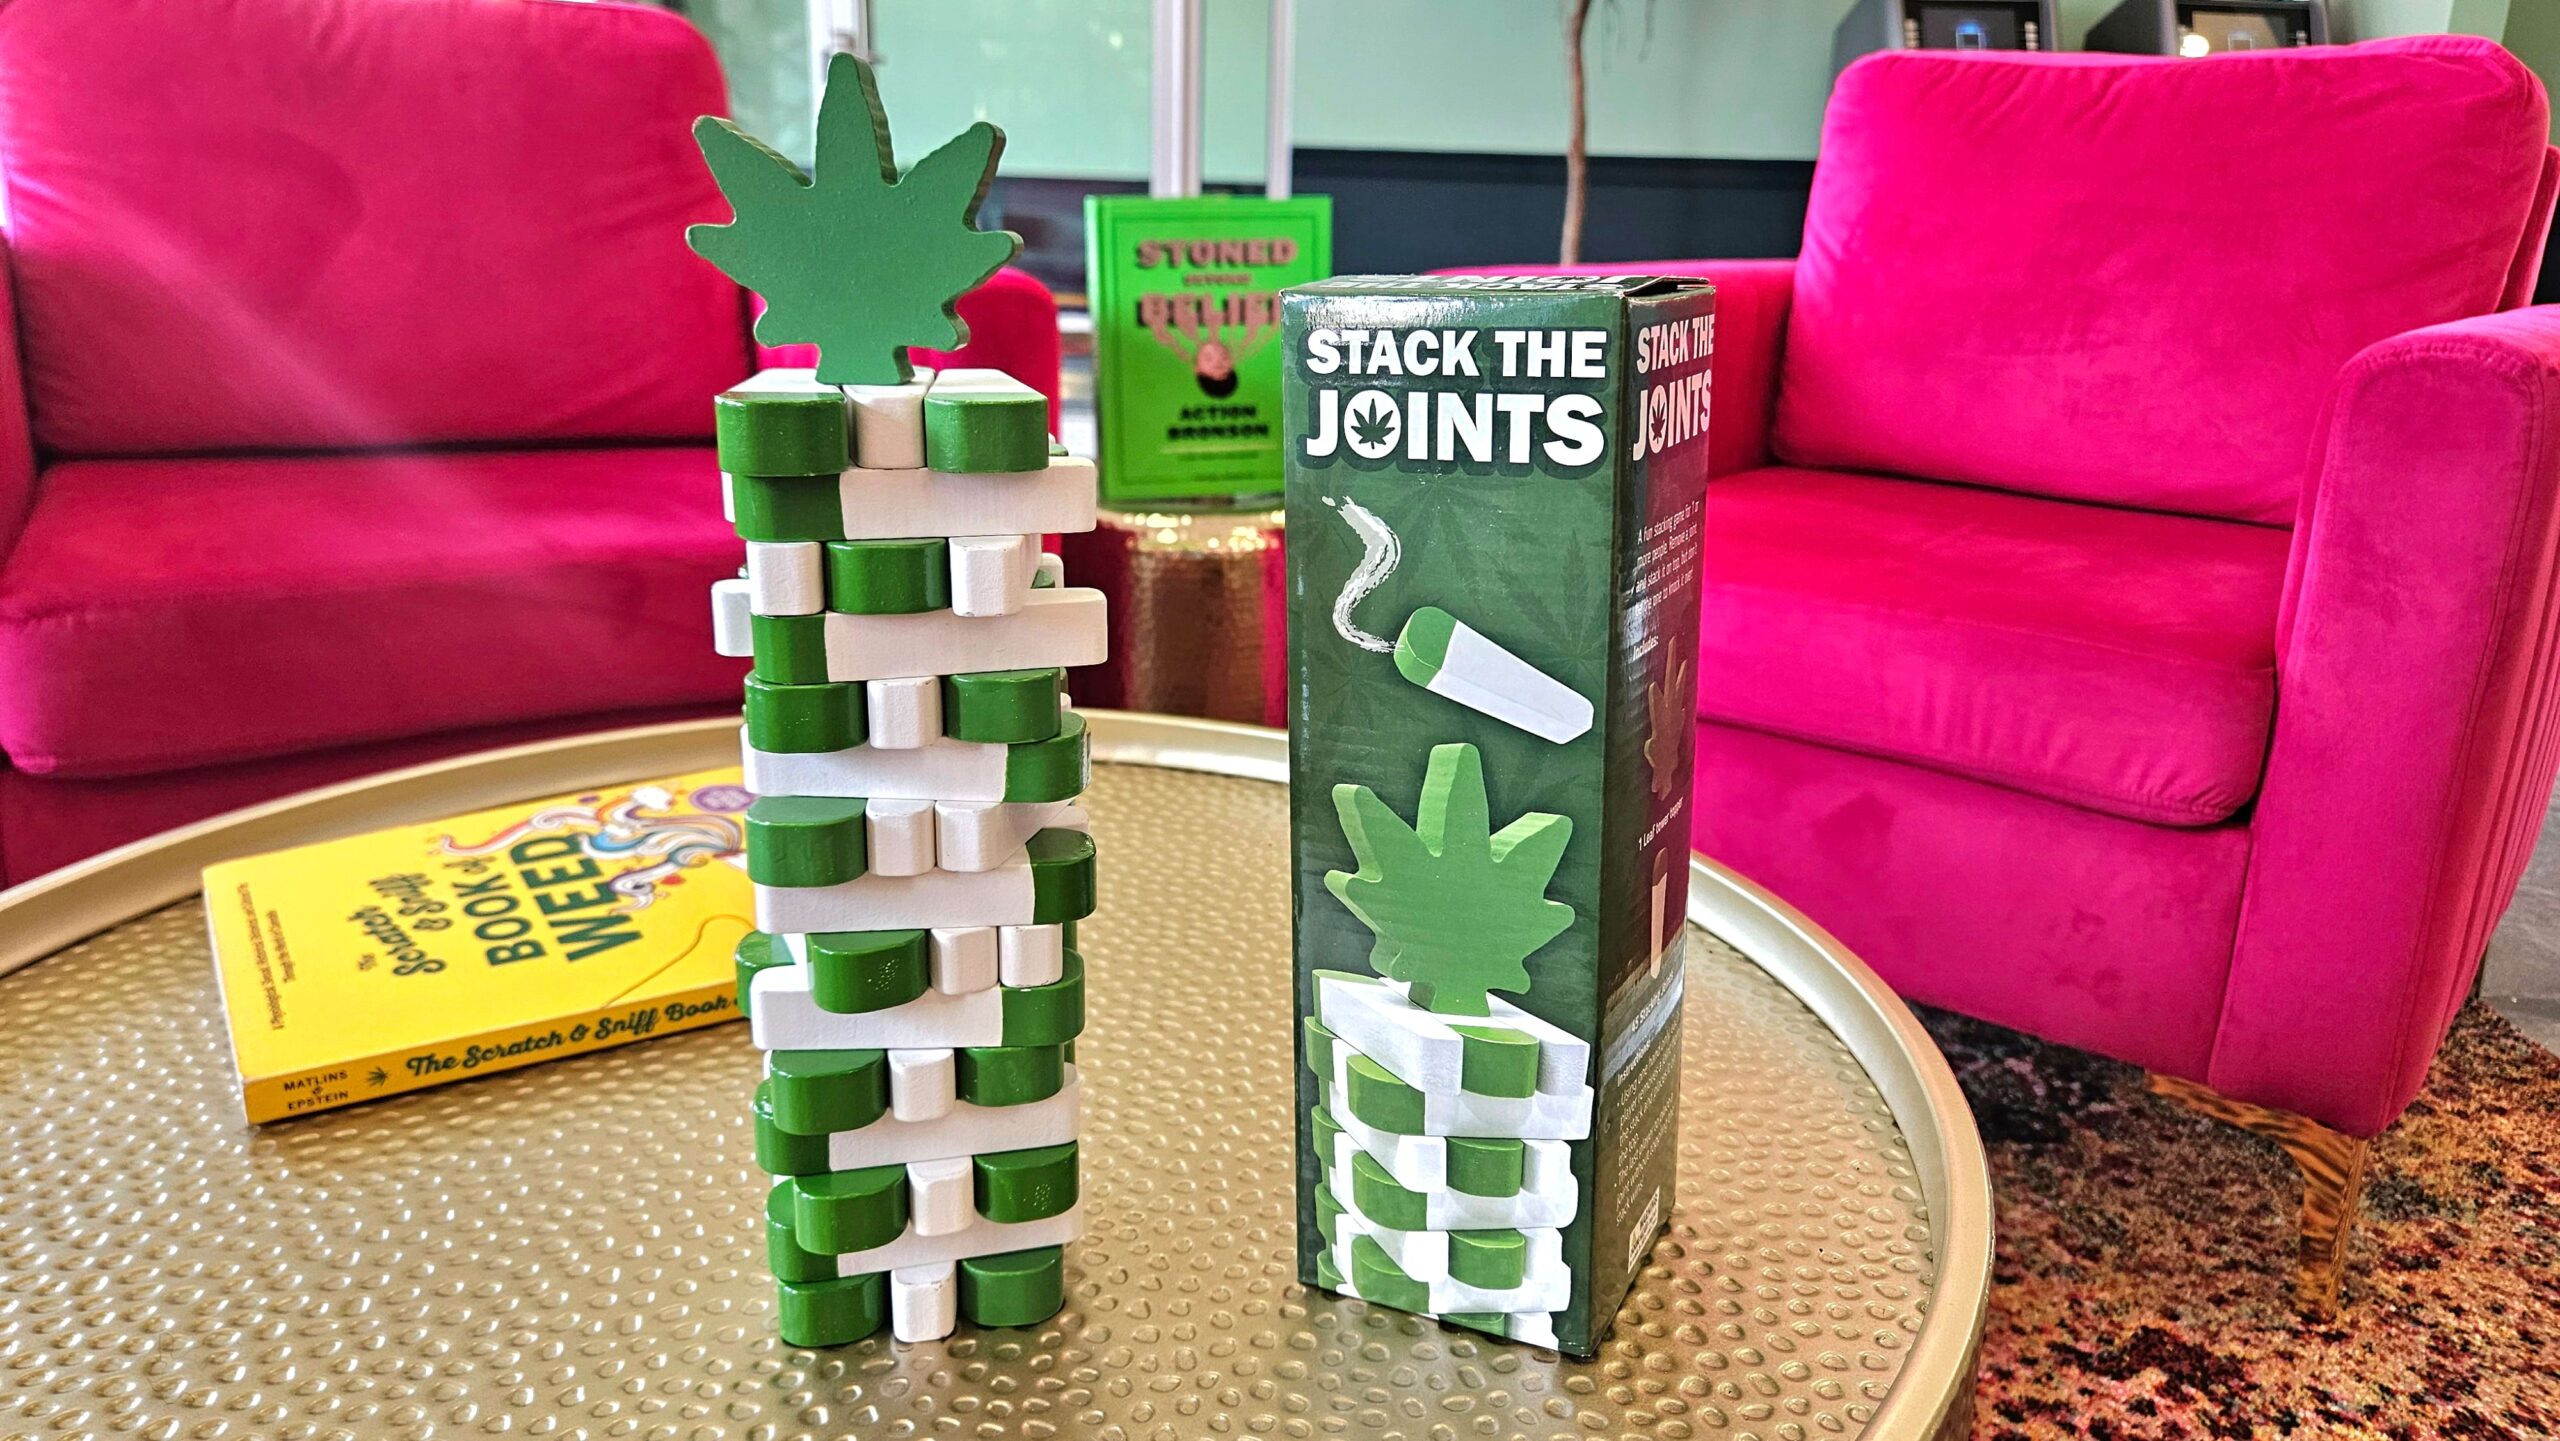 Stack the Joints Game at Ivy Hall Dispensary - Logan Square